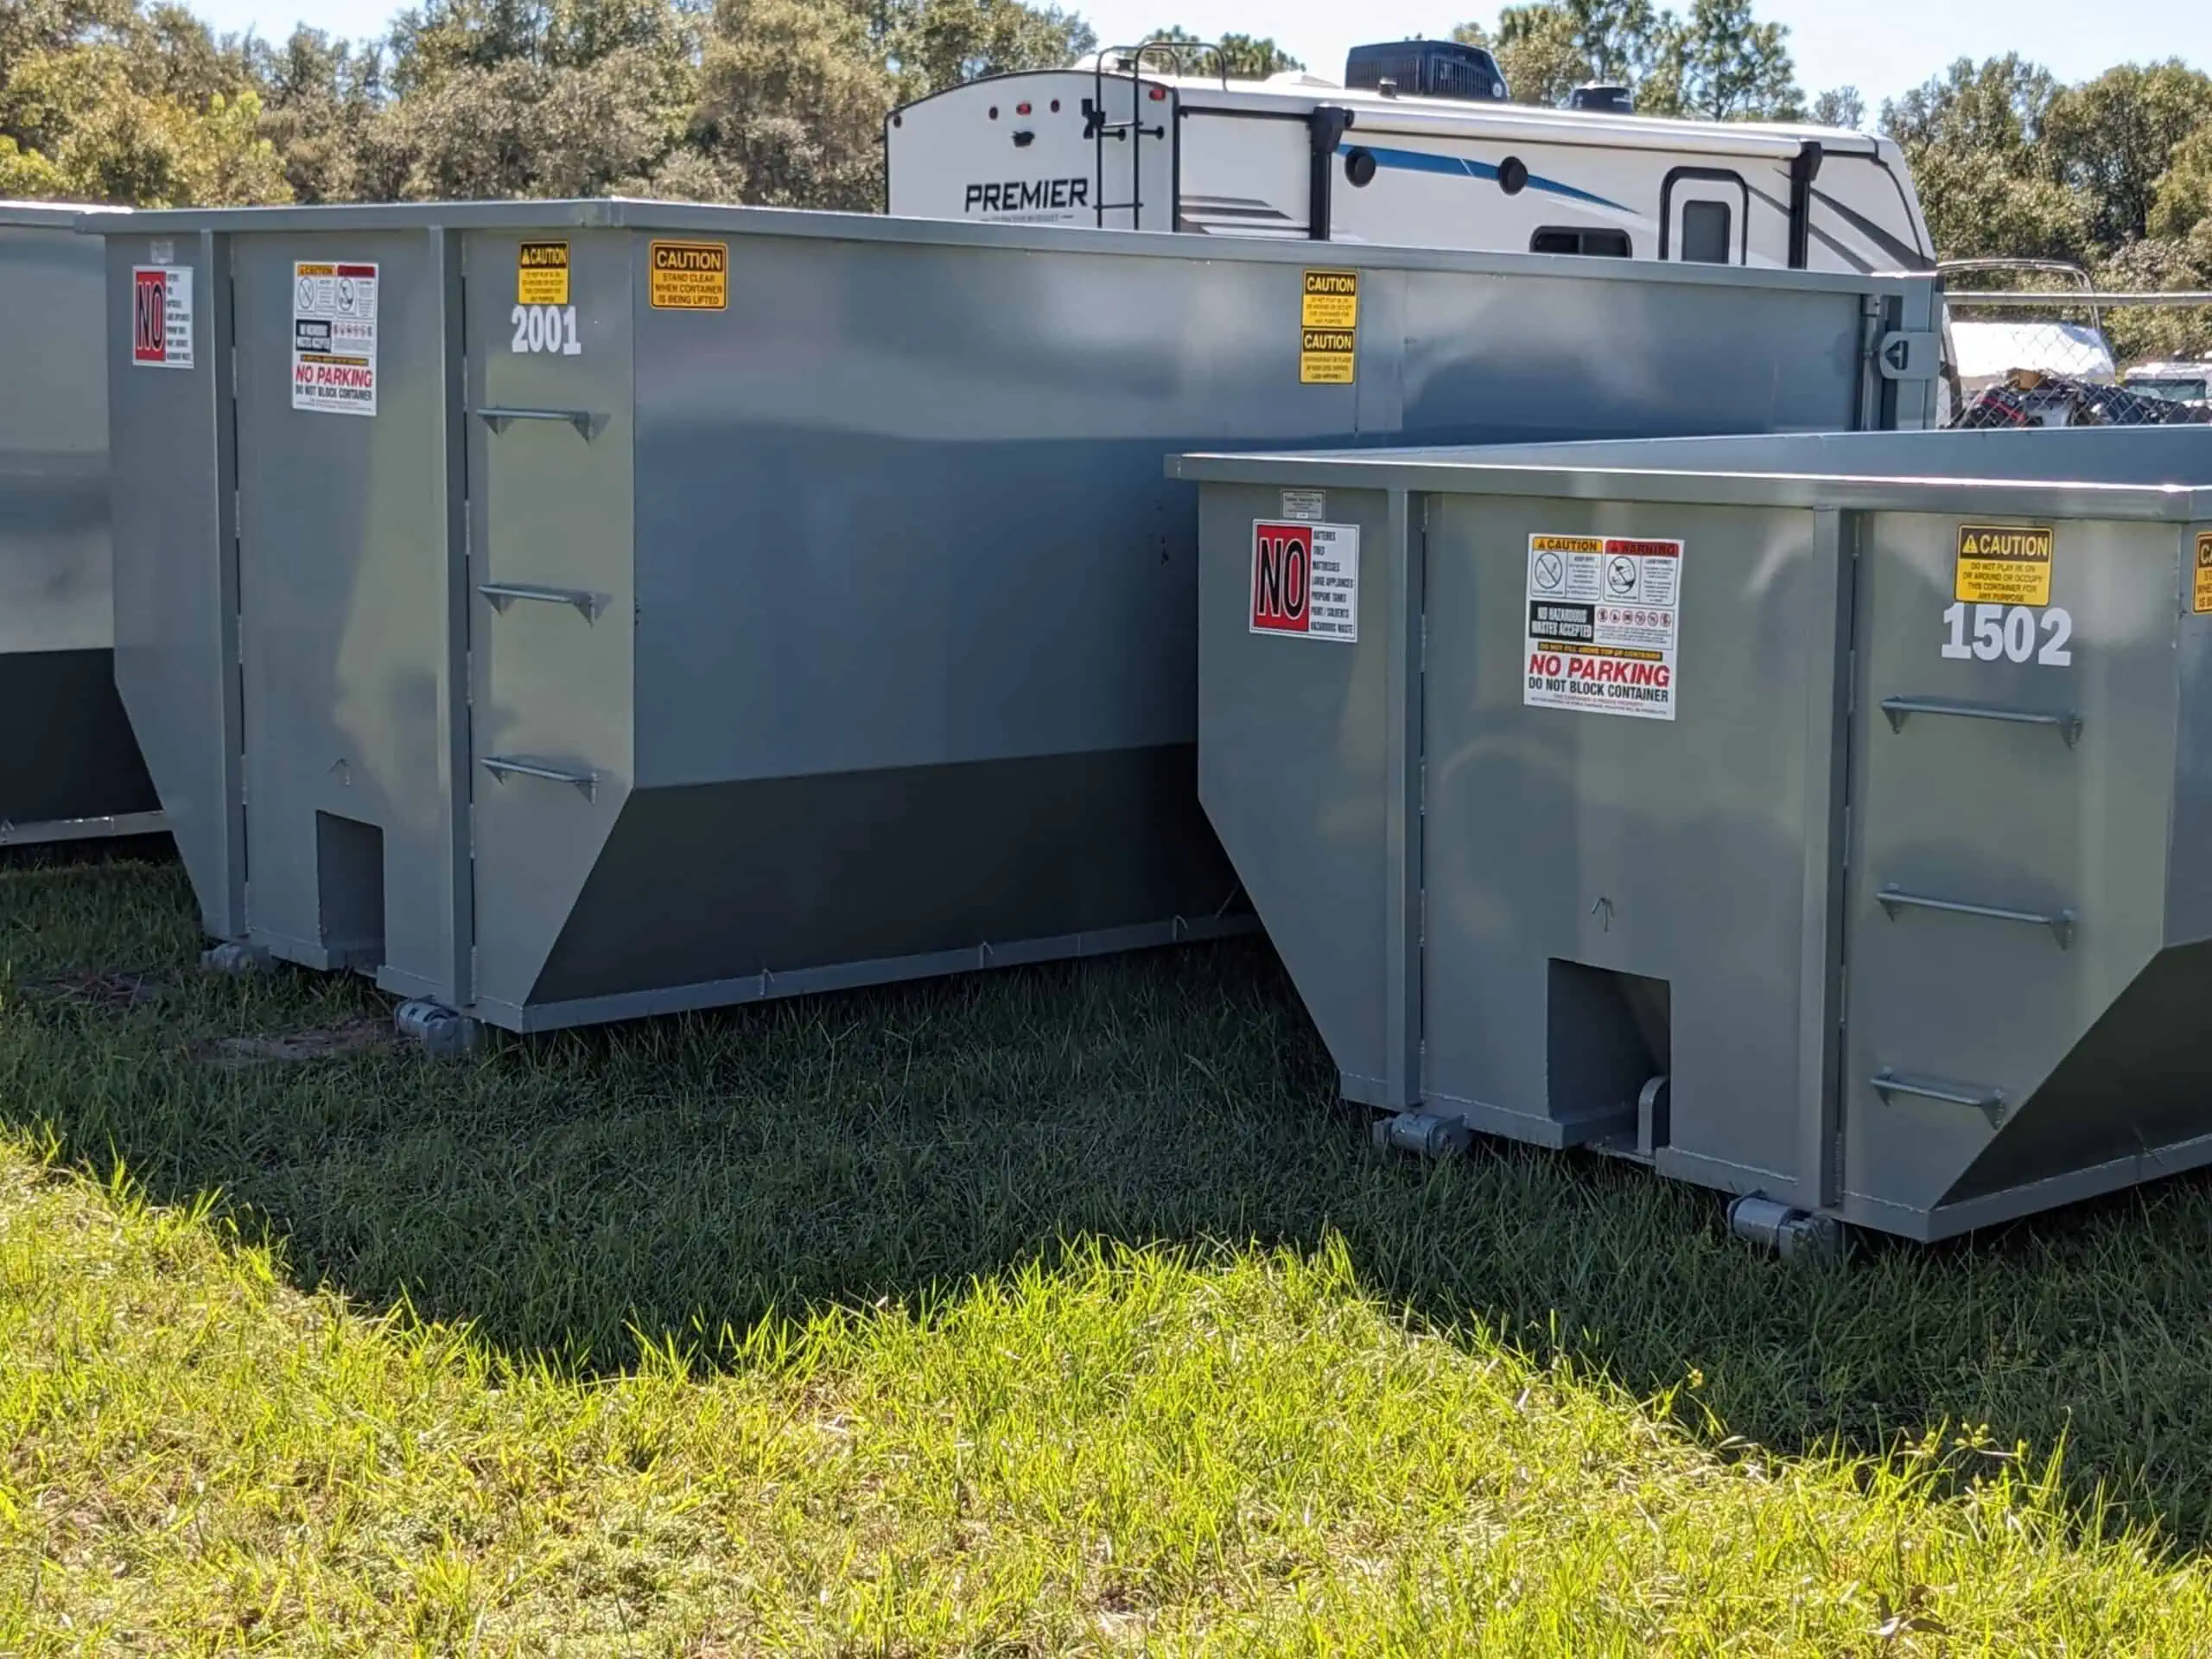 20-yard dumpsters for waste management solutions by Yankee Dumpsters in Orlando, FL.